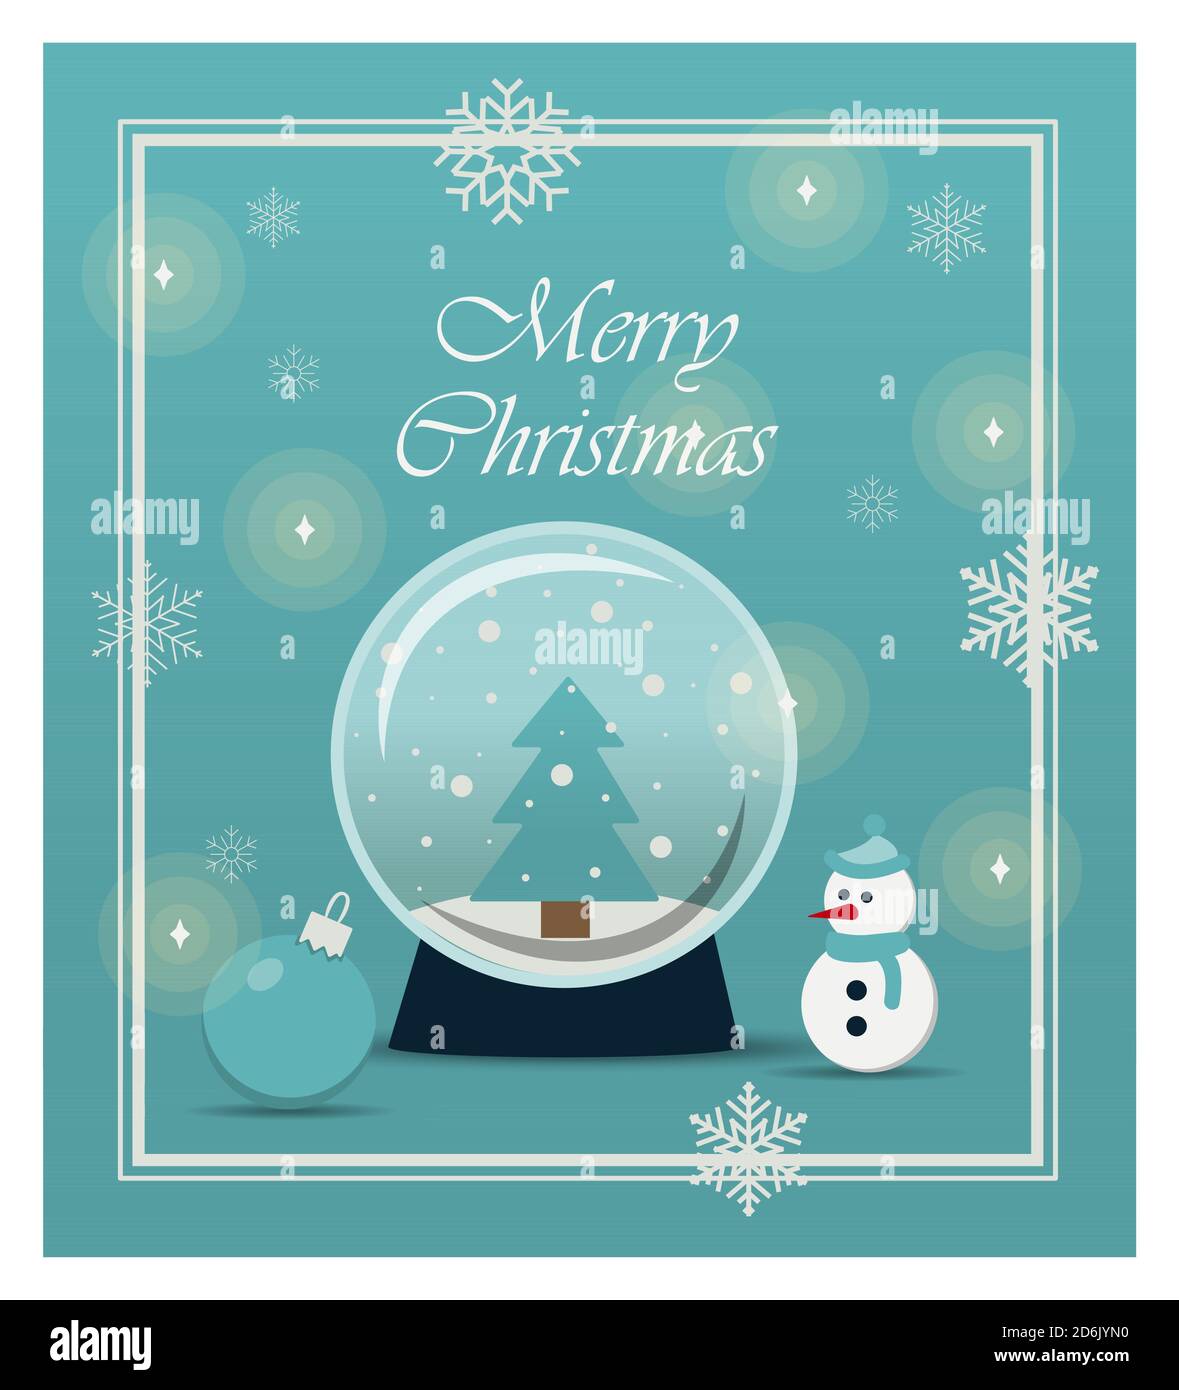 Beautiful Christmas Card With Toys And Gifts Flat Illustration For A Website Store Or App With Children S Products Bright Holiday Banner With A Snow Ball Snowman Snowflakes Christmas Balls And Bright